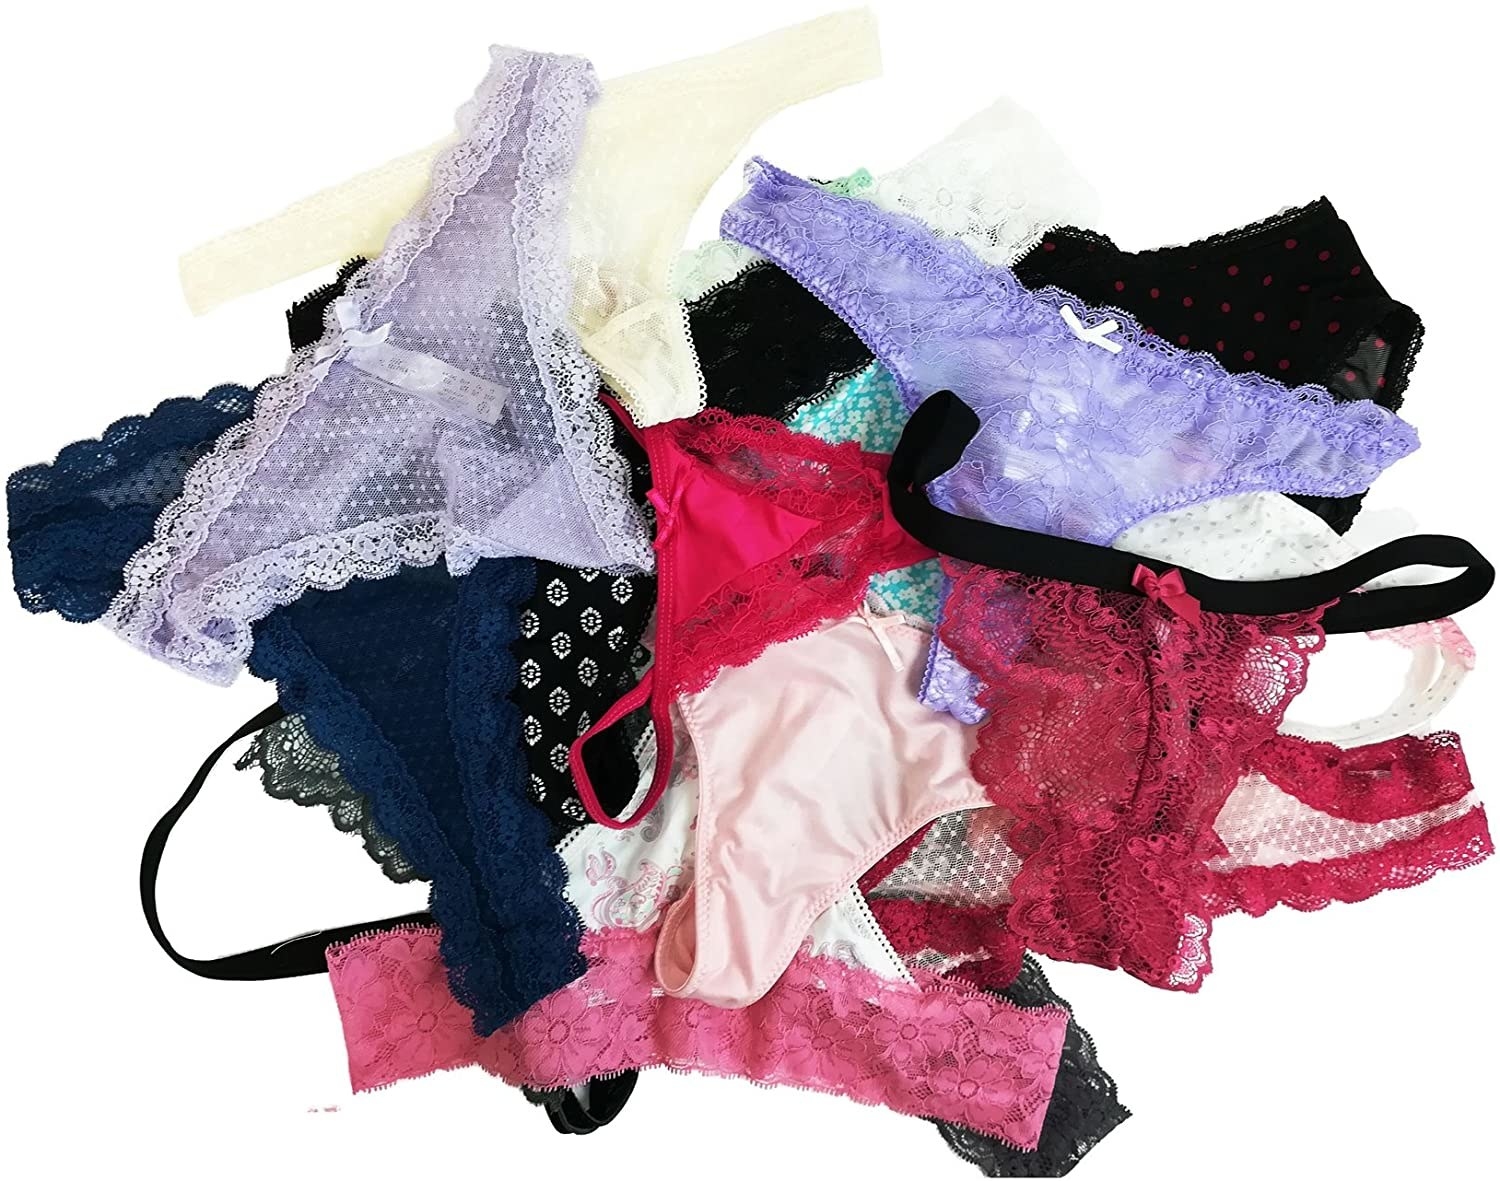 A pile of undies from the 10-pack